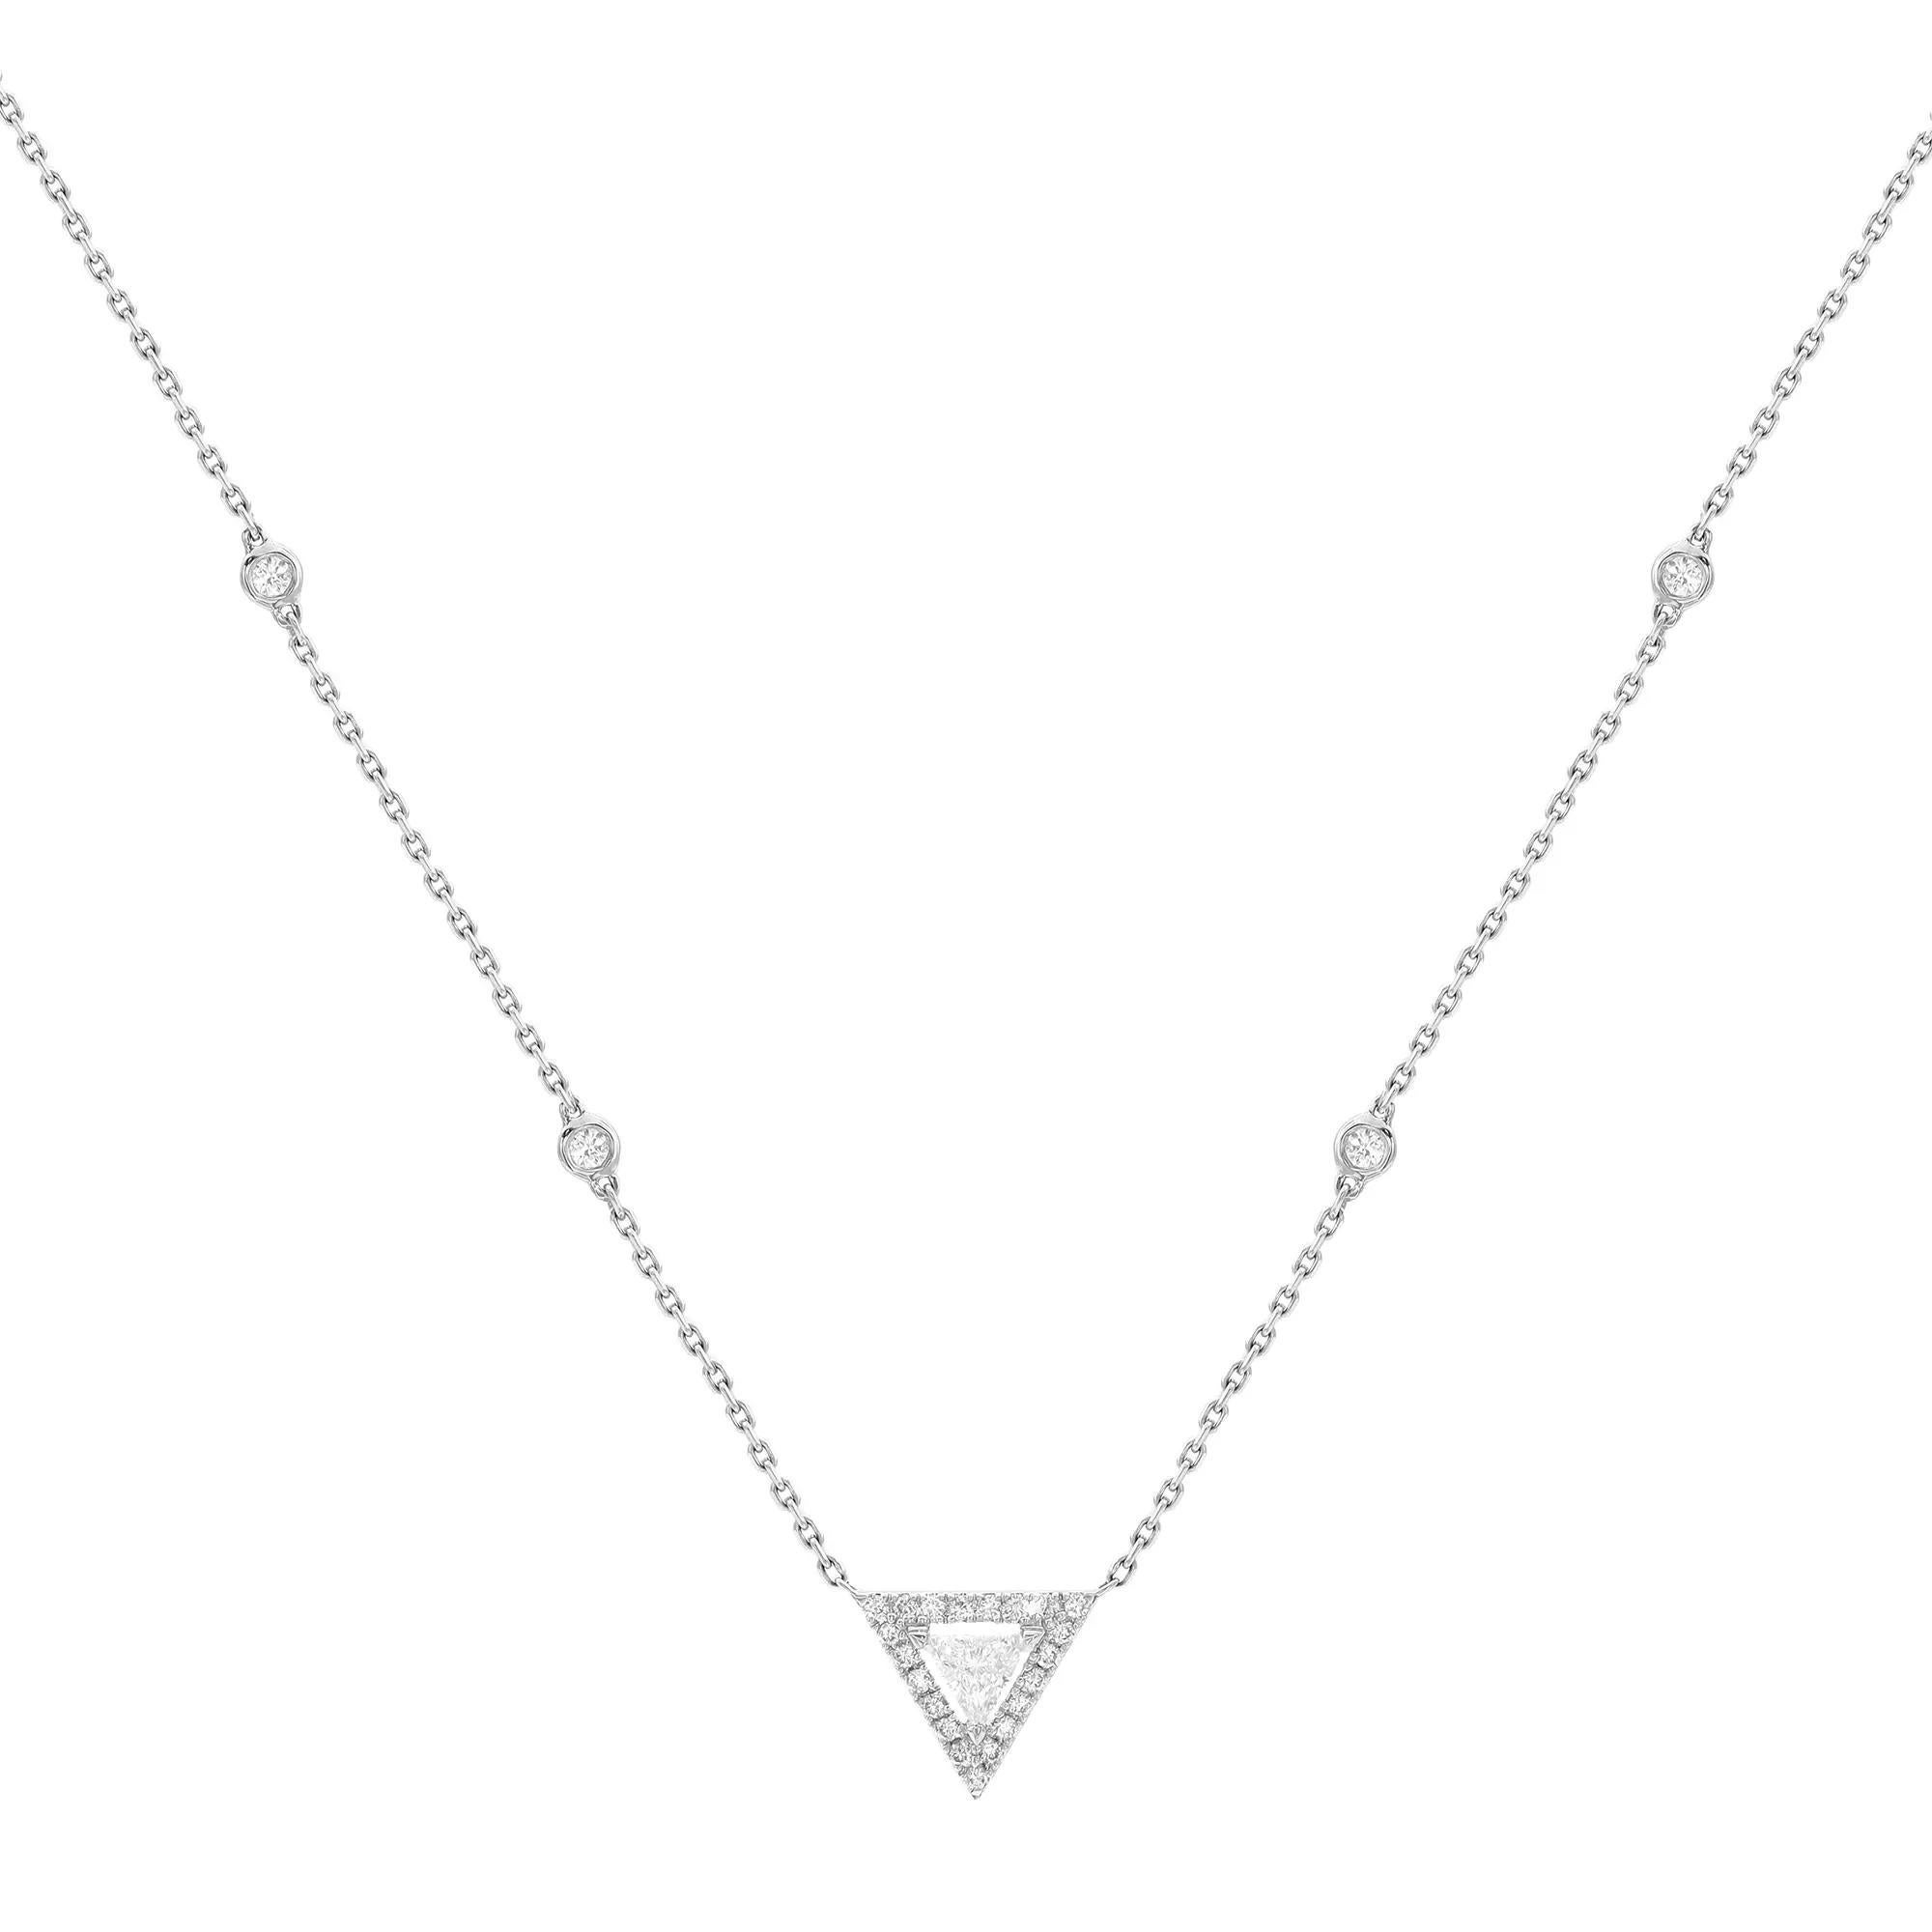 Taille ronde Messika 0.47Cttw Thea Diamond Chain Necklace 18K White Gold 17.5 Inches en vente